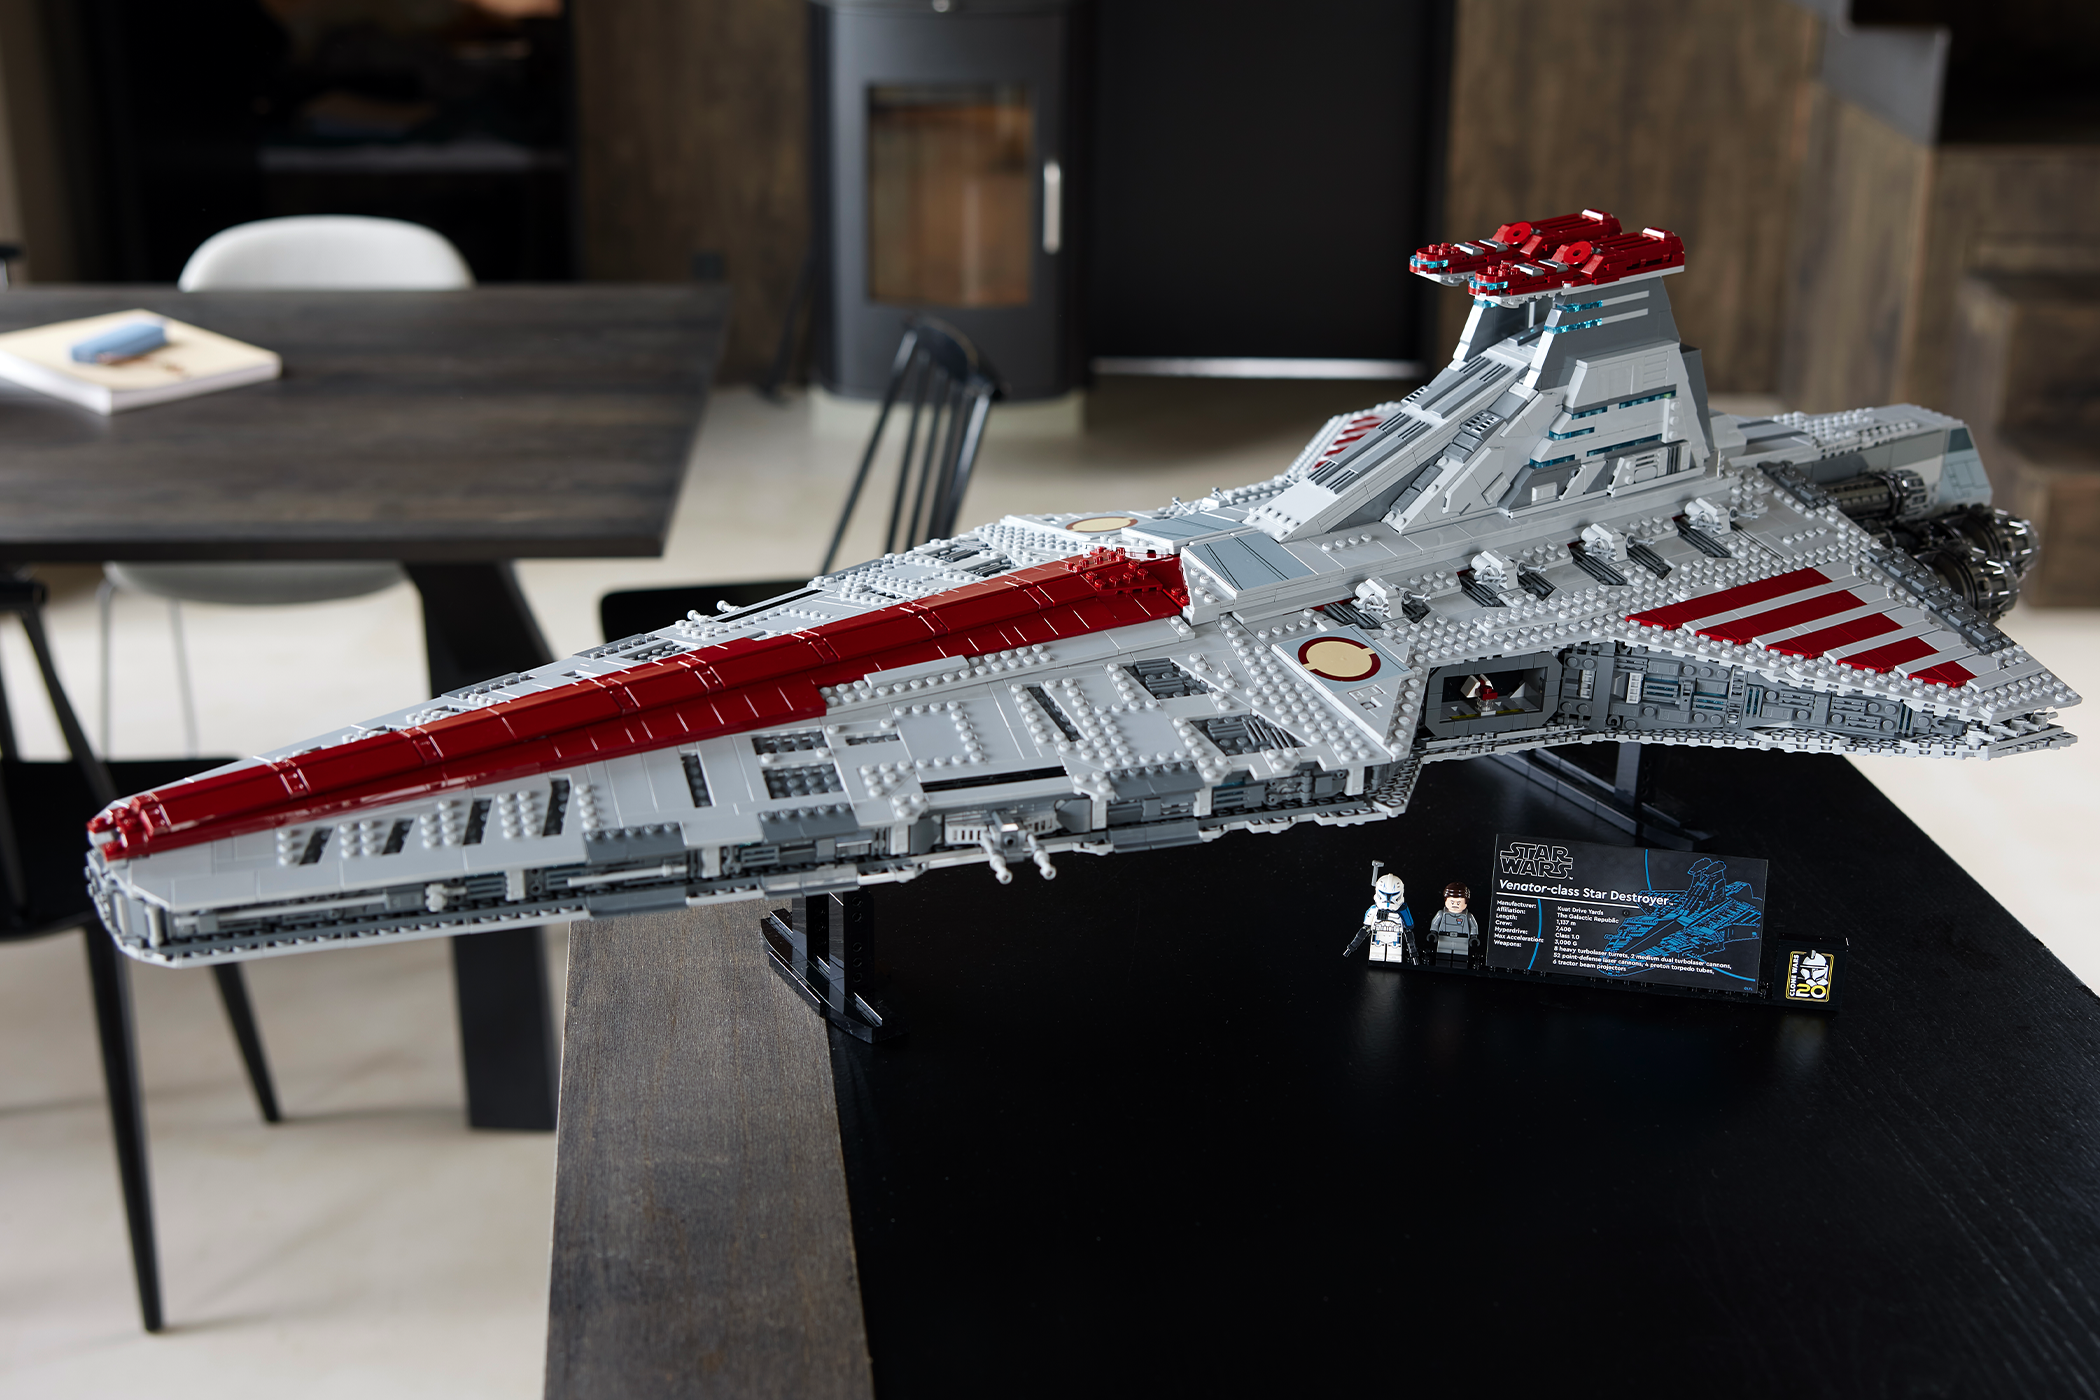 The LEGO Star Wars Venator-Class Republic Attack Cruiser assembled and viewed from the side